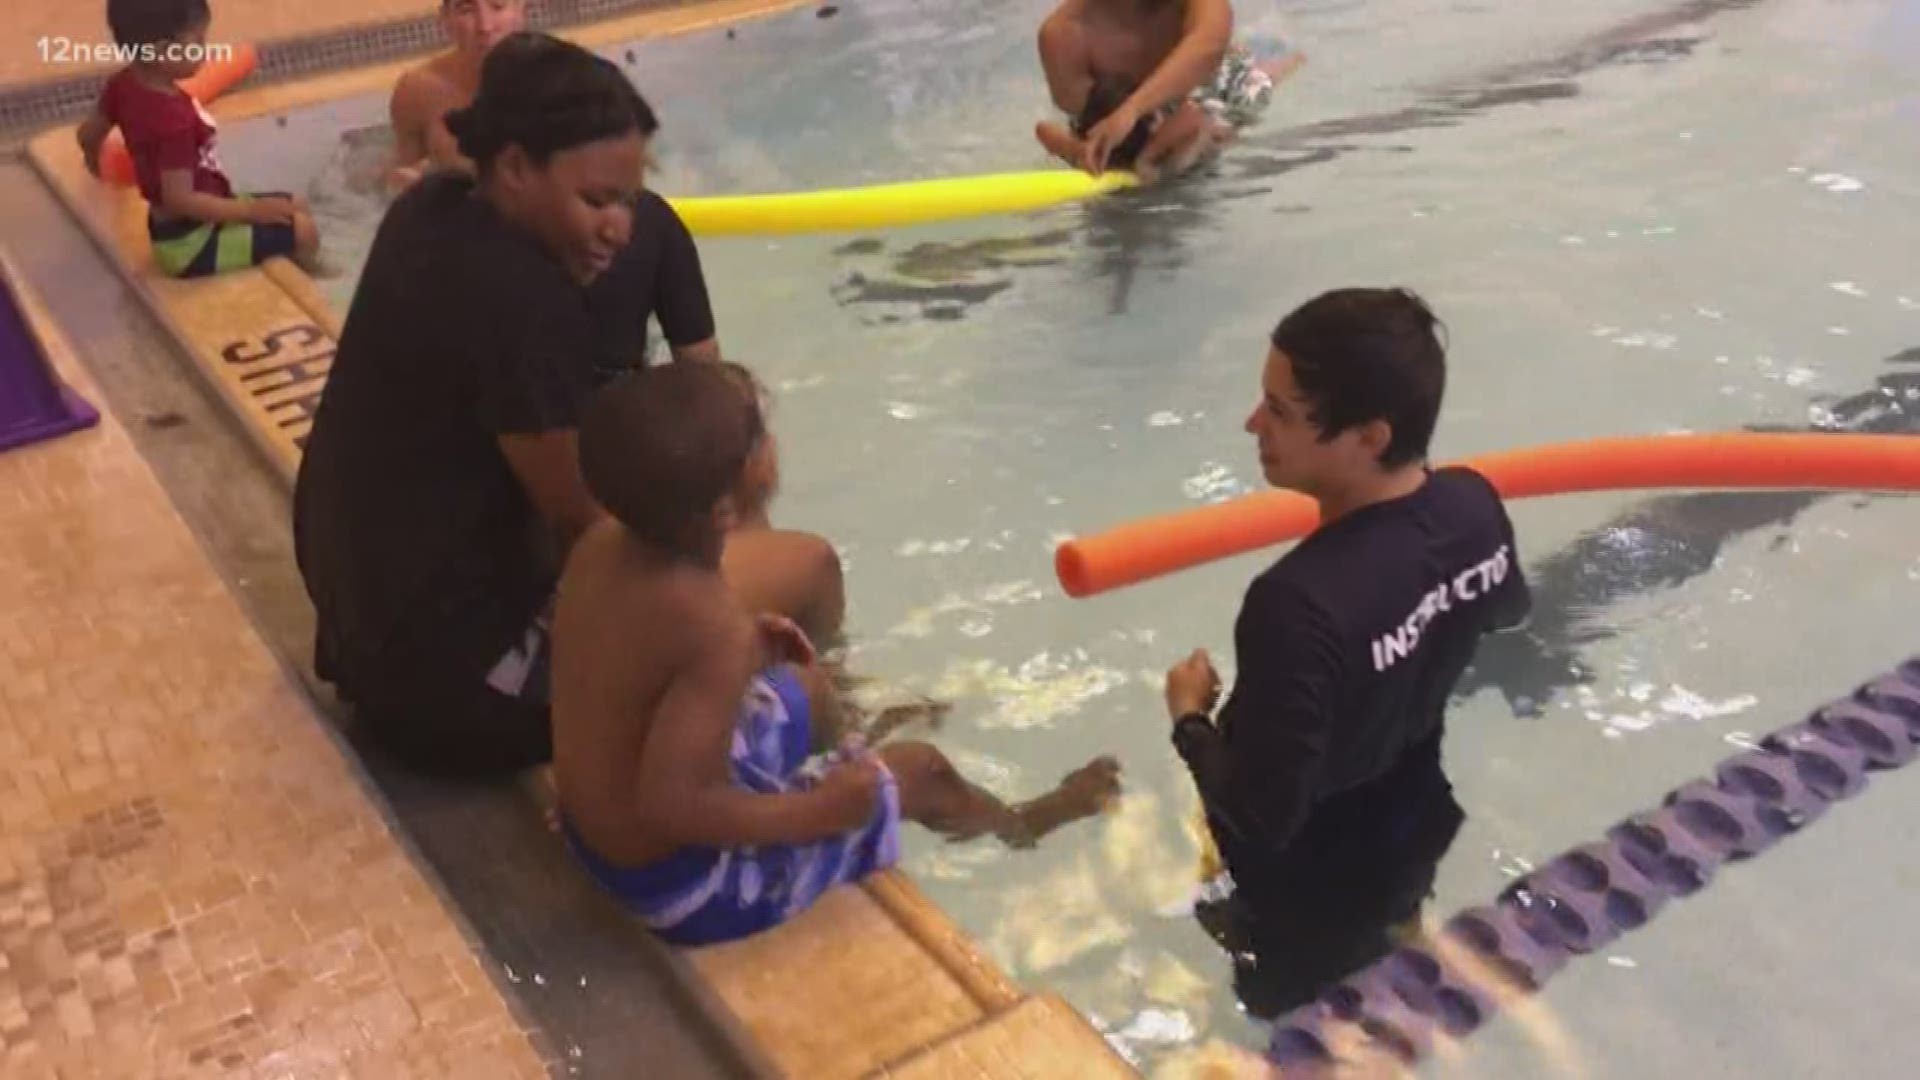 Drowning is the leading cause of accidental death for children ages 1 to 4 years old, according to the World Health Organization. YMCA facilities across the Valley are offering 2,000 free swimming lessons and offering important tips to prevent drownings through May.